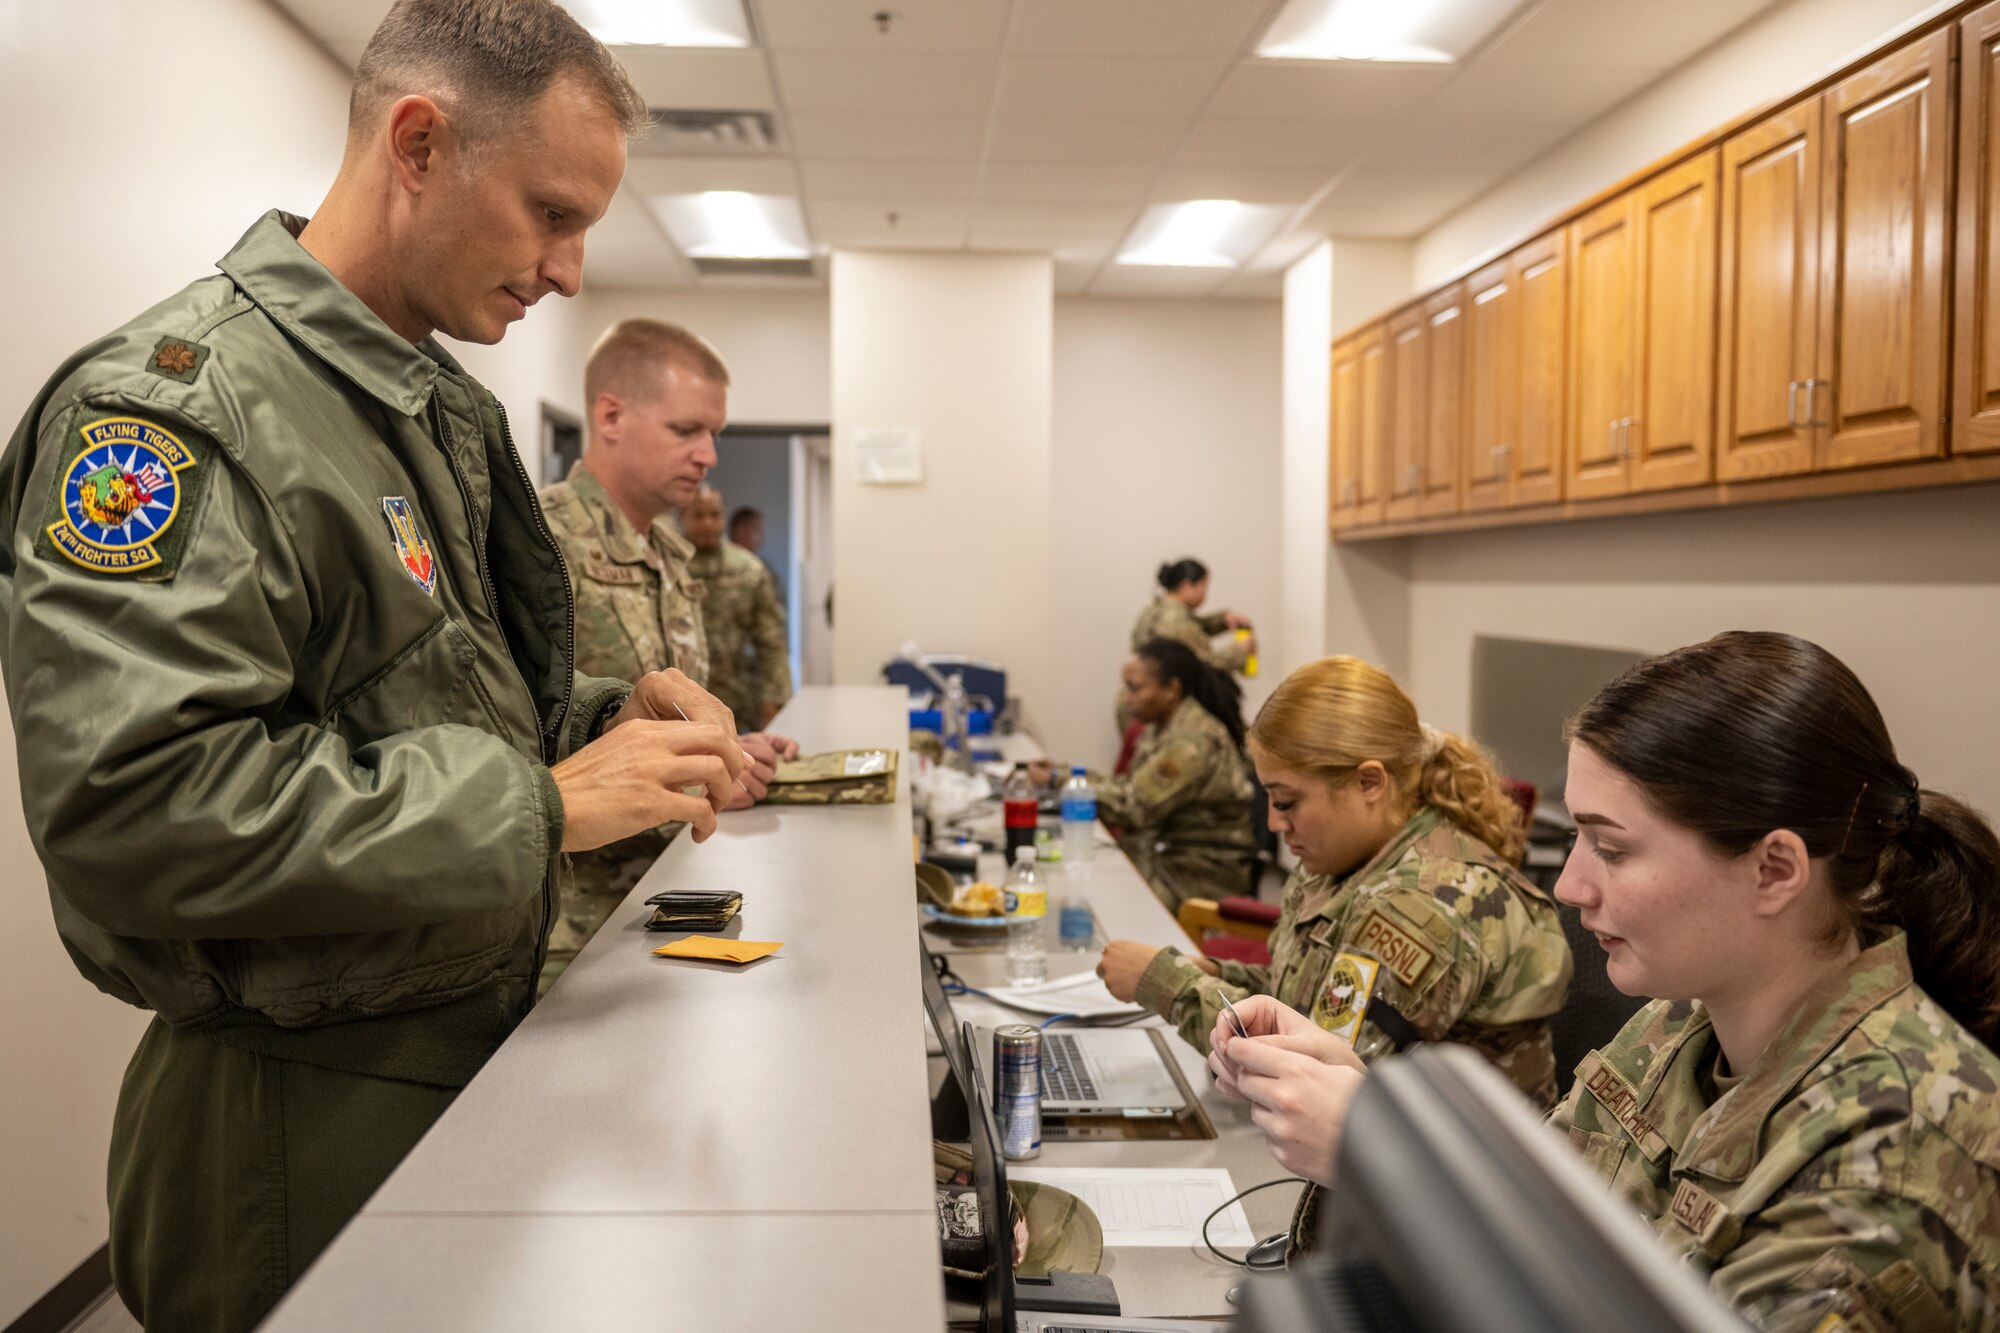 Airmen assigned to the 23rd Wing process through a personnel deployment function line.